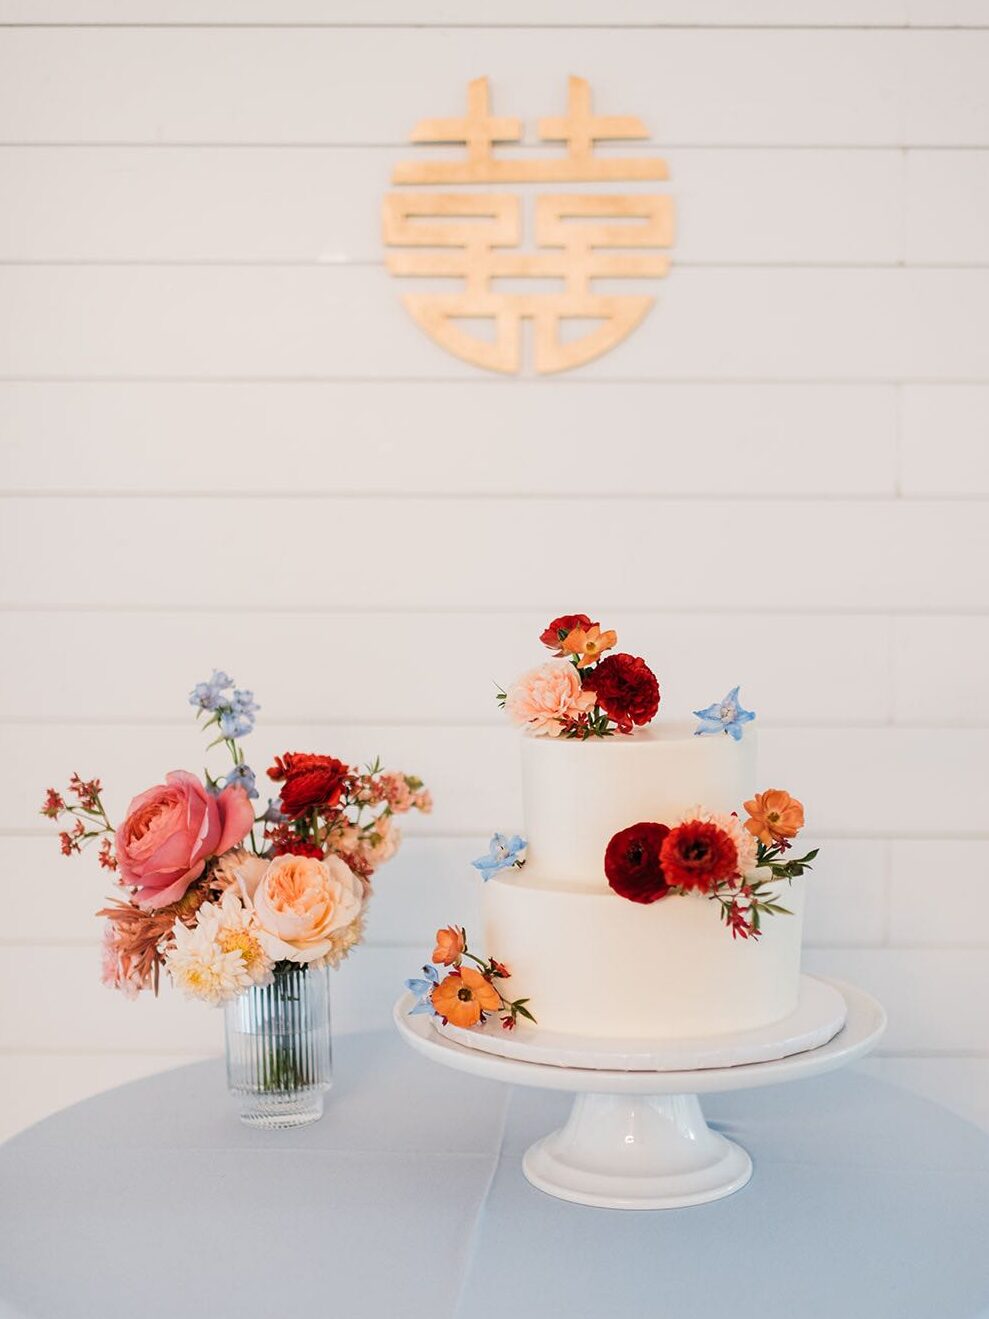 Garden wedding cake with white frosting and red, orange and blue flowers